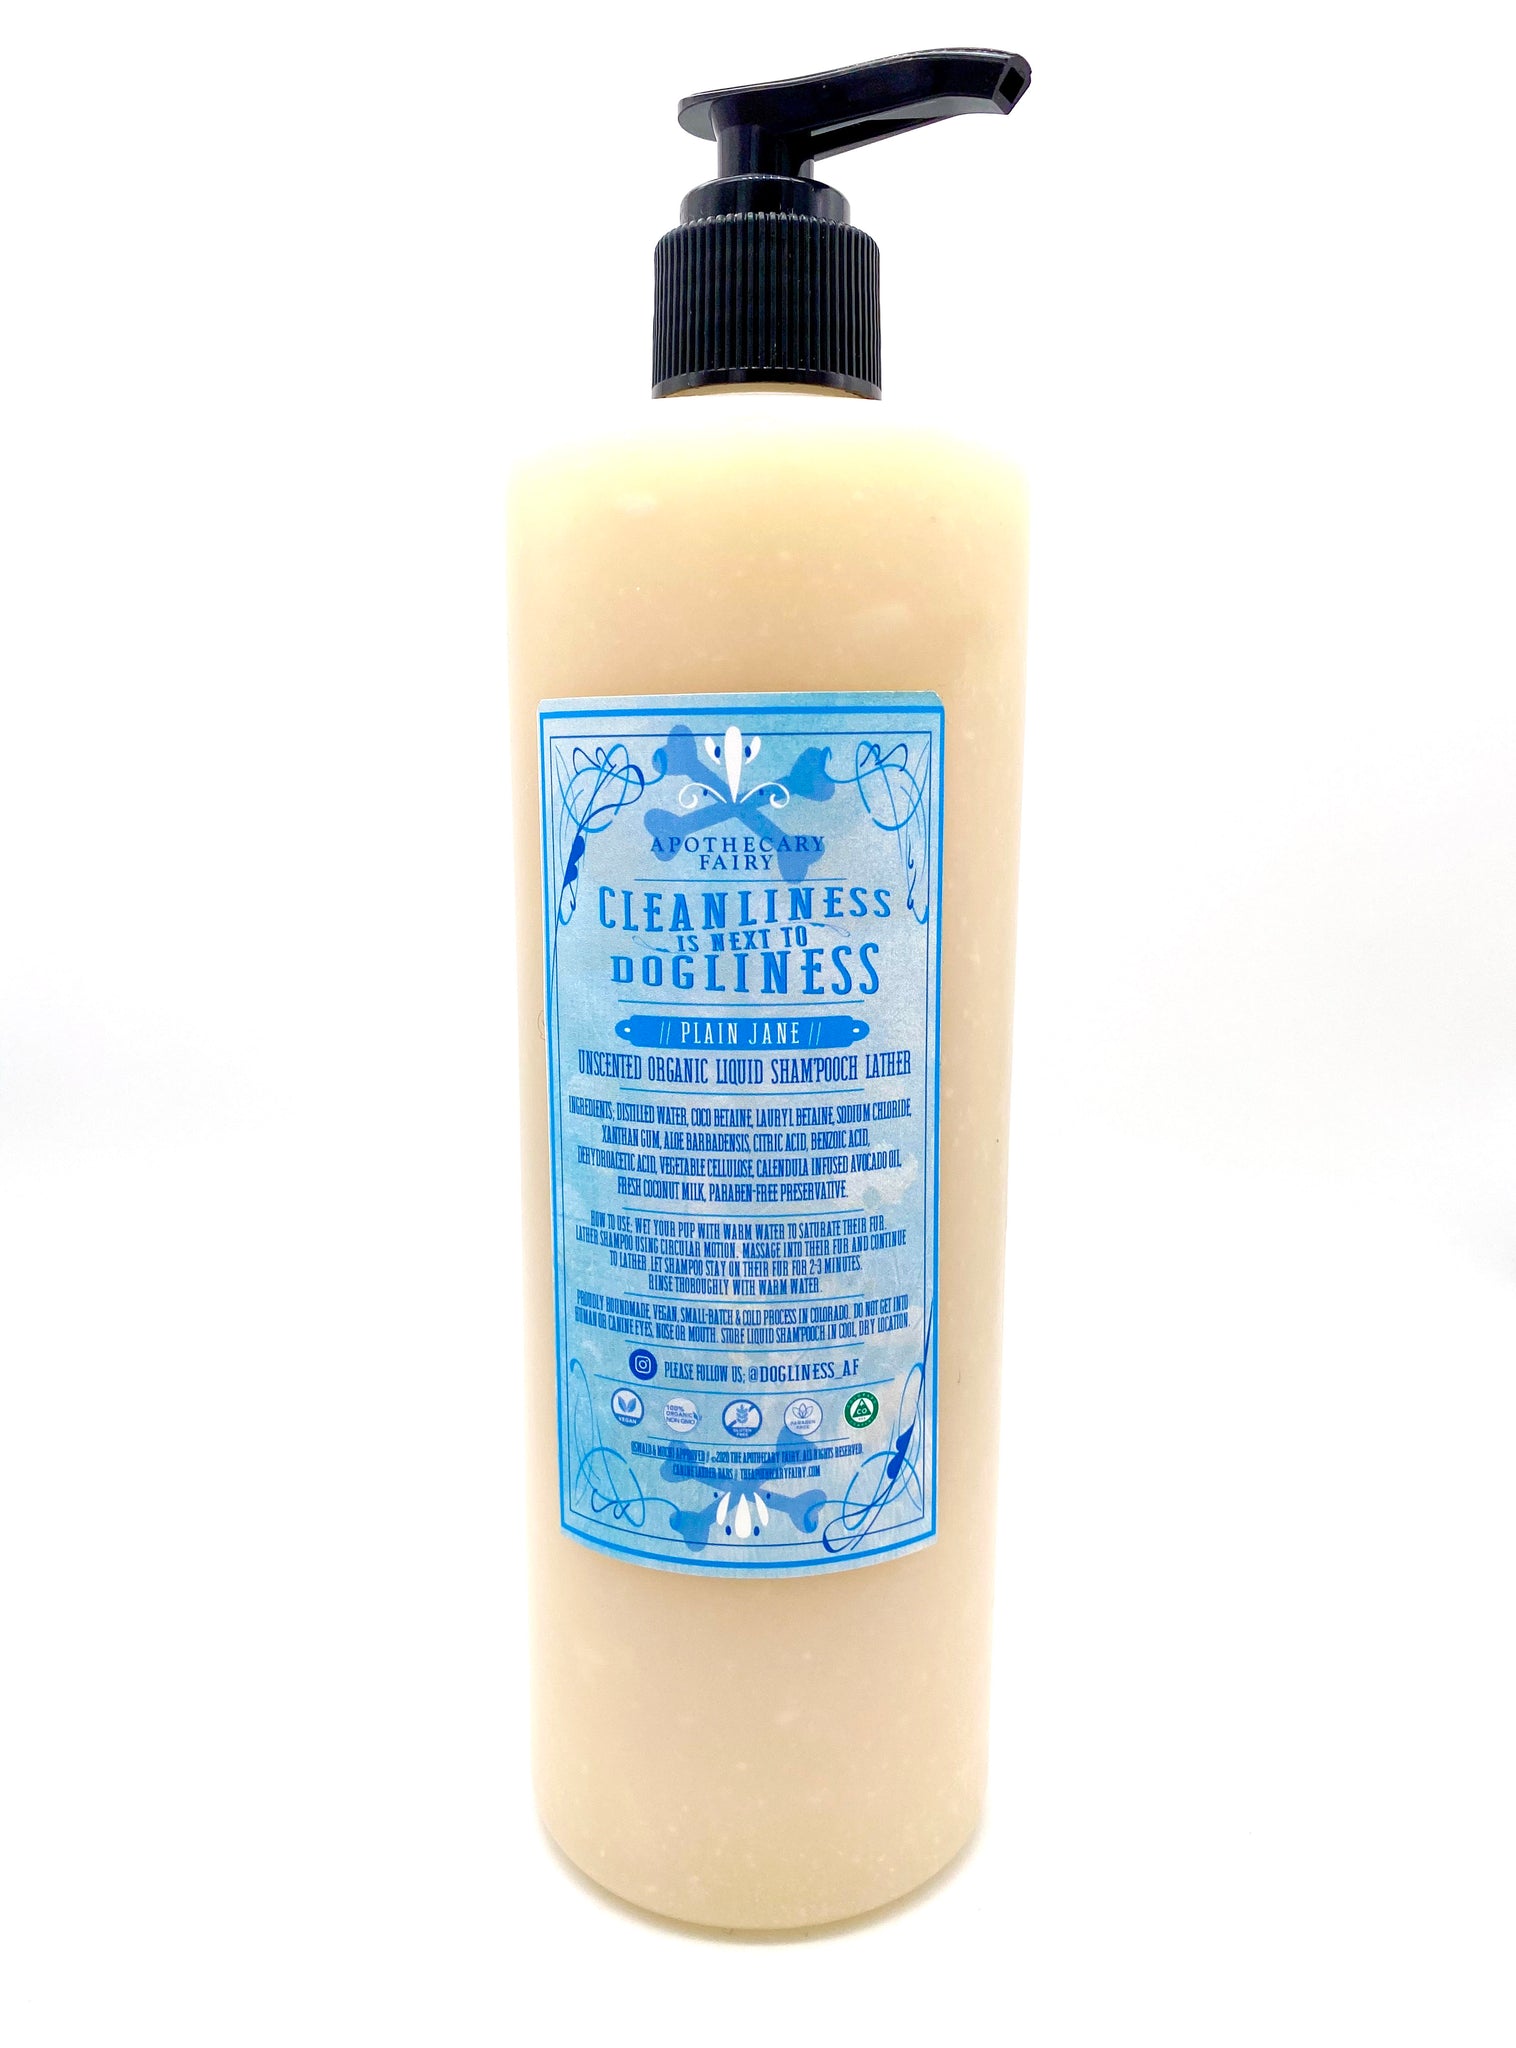 Cleanliness Is Next To Dogliness- Plain Jane Liquid Sham'pooch 16oz - The Apothecary Fairy